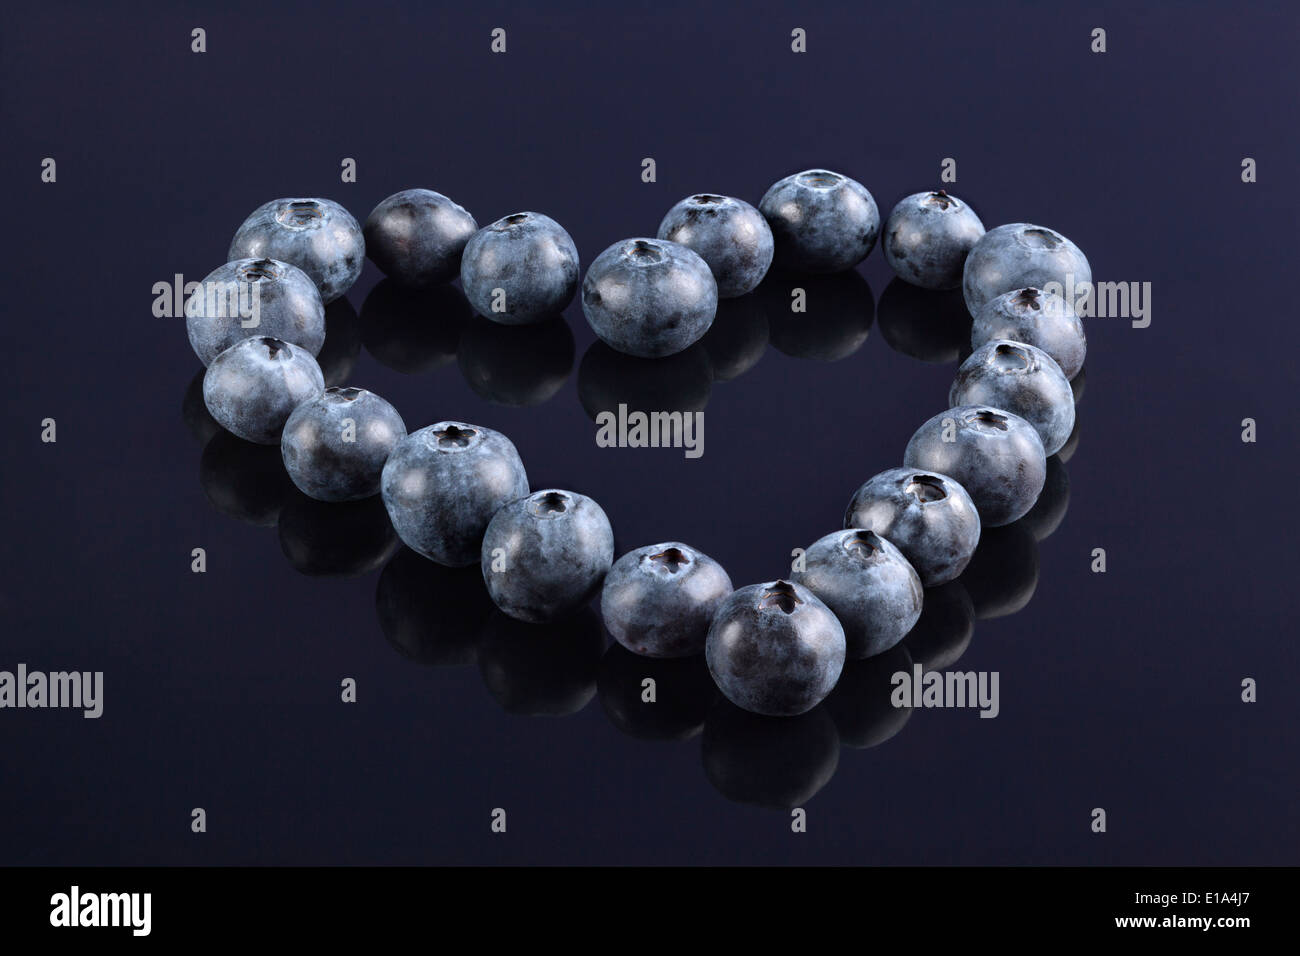 Fresh Blueberries arranged in the shape of a Heart Stock Photo